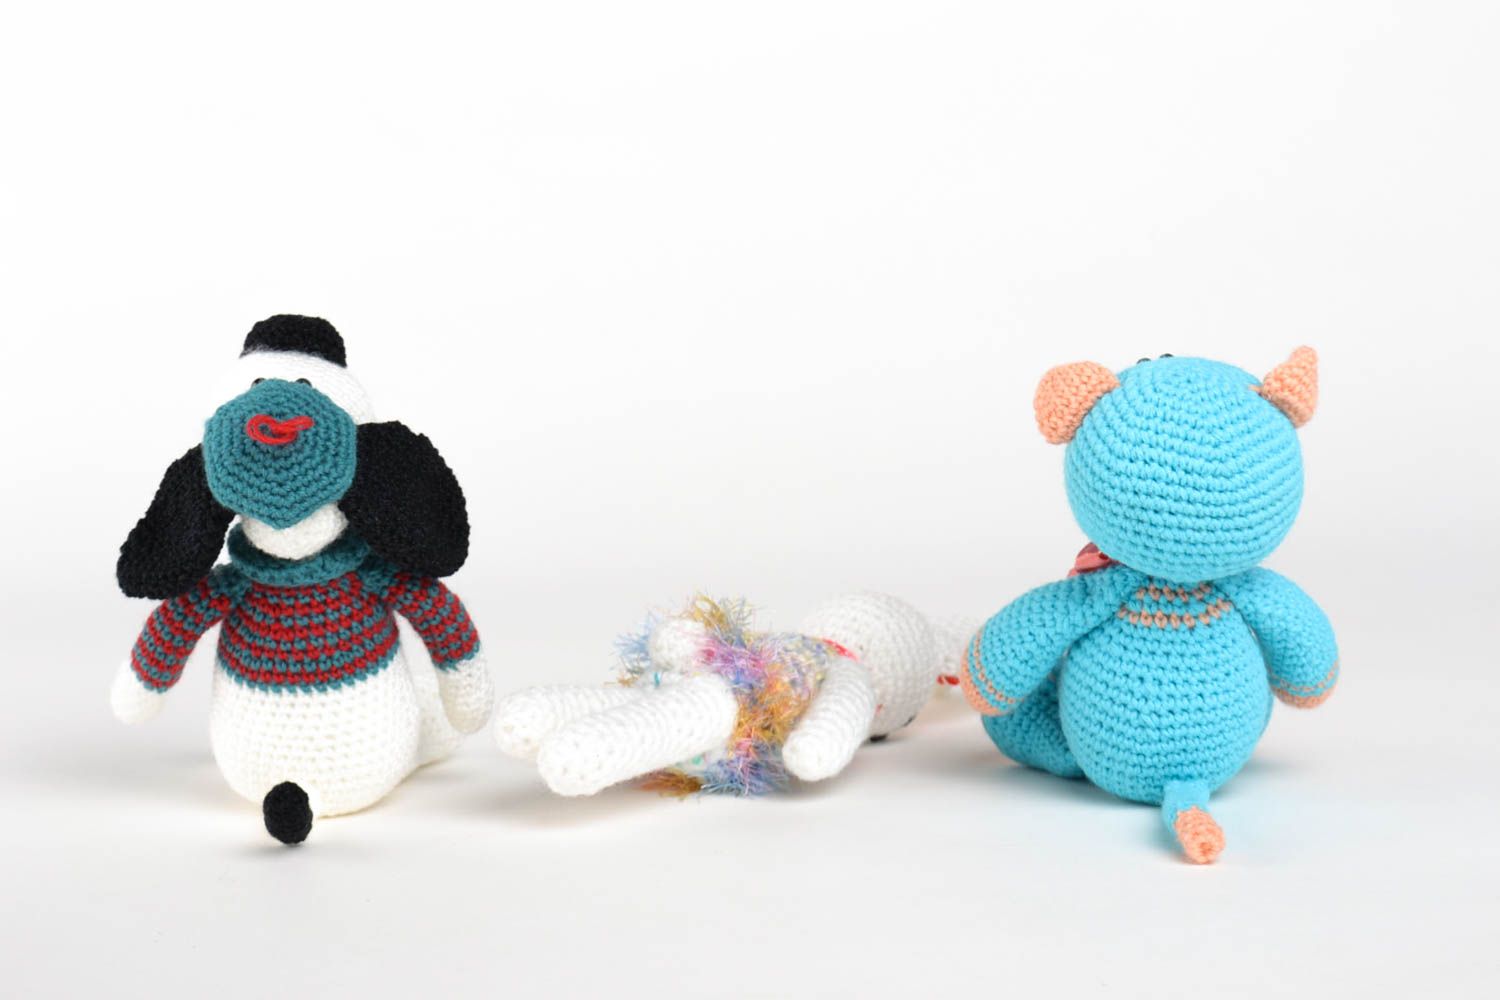 Handmade crocheted toys for kids crocheted toys interior toy present for baby photo 4